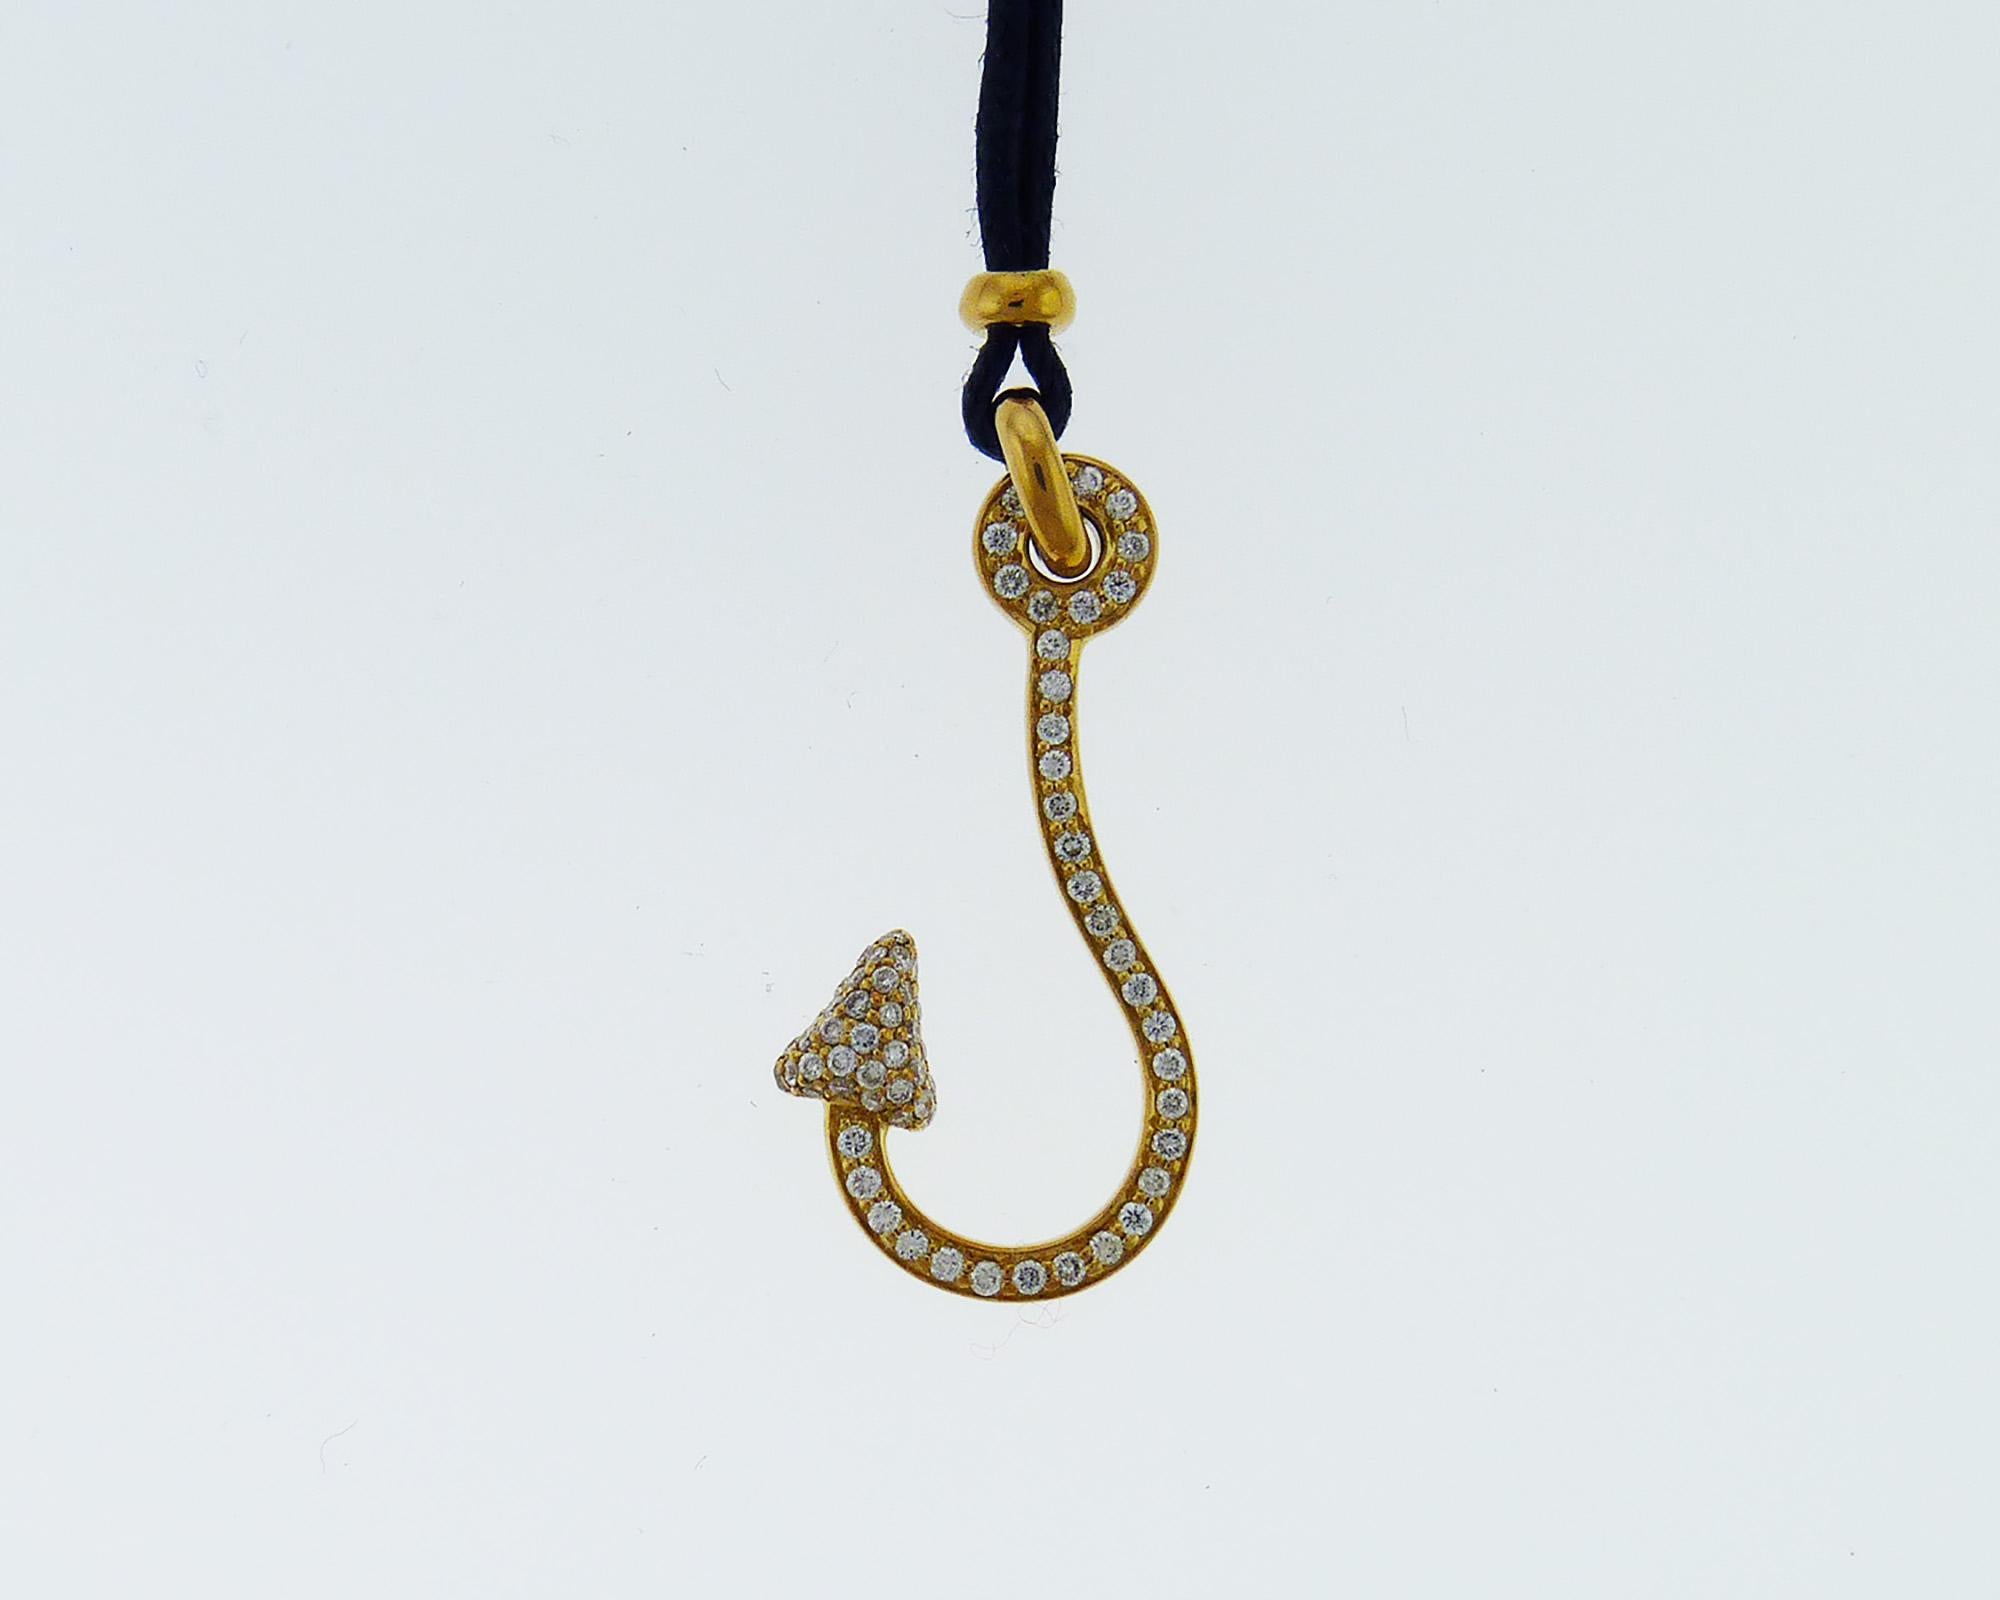 Modern cord necklace with an anchor pendant embellished with white diamonds and set in 18K yellow gold. 
Total weight of diamonds is 0.41 carats.
The length of the cord is 15 inches.
The length of the pendant is 1.3 inches.
Weight is 4 grams.